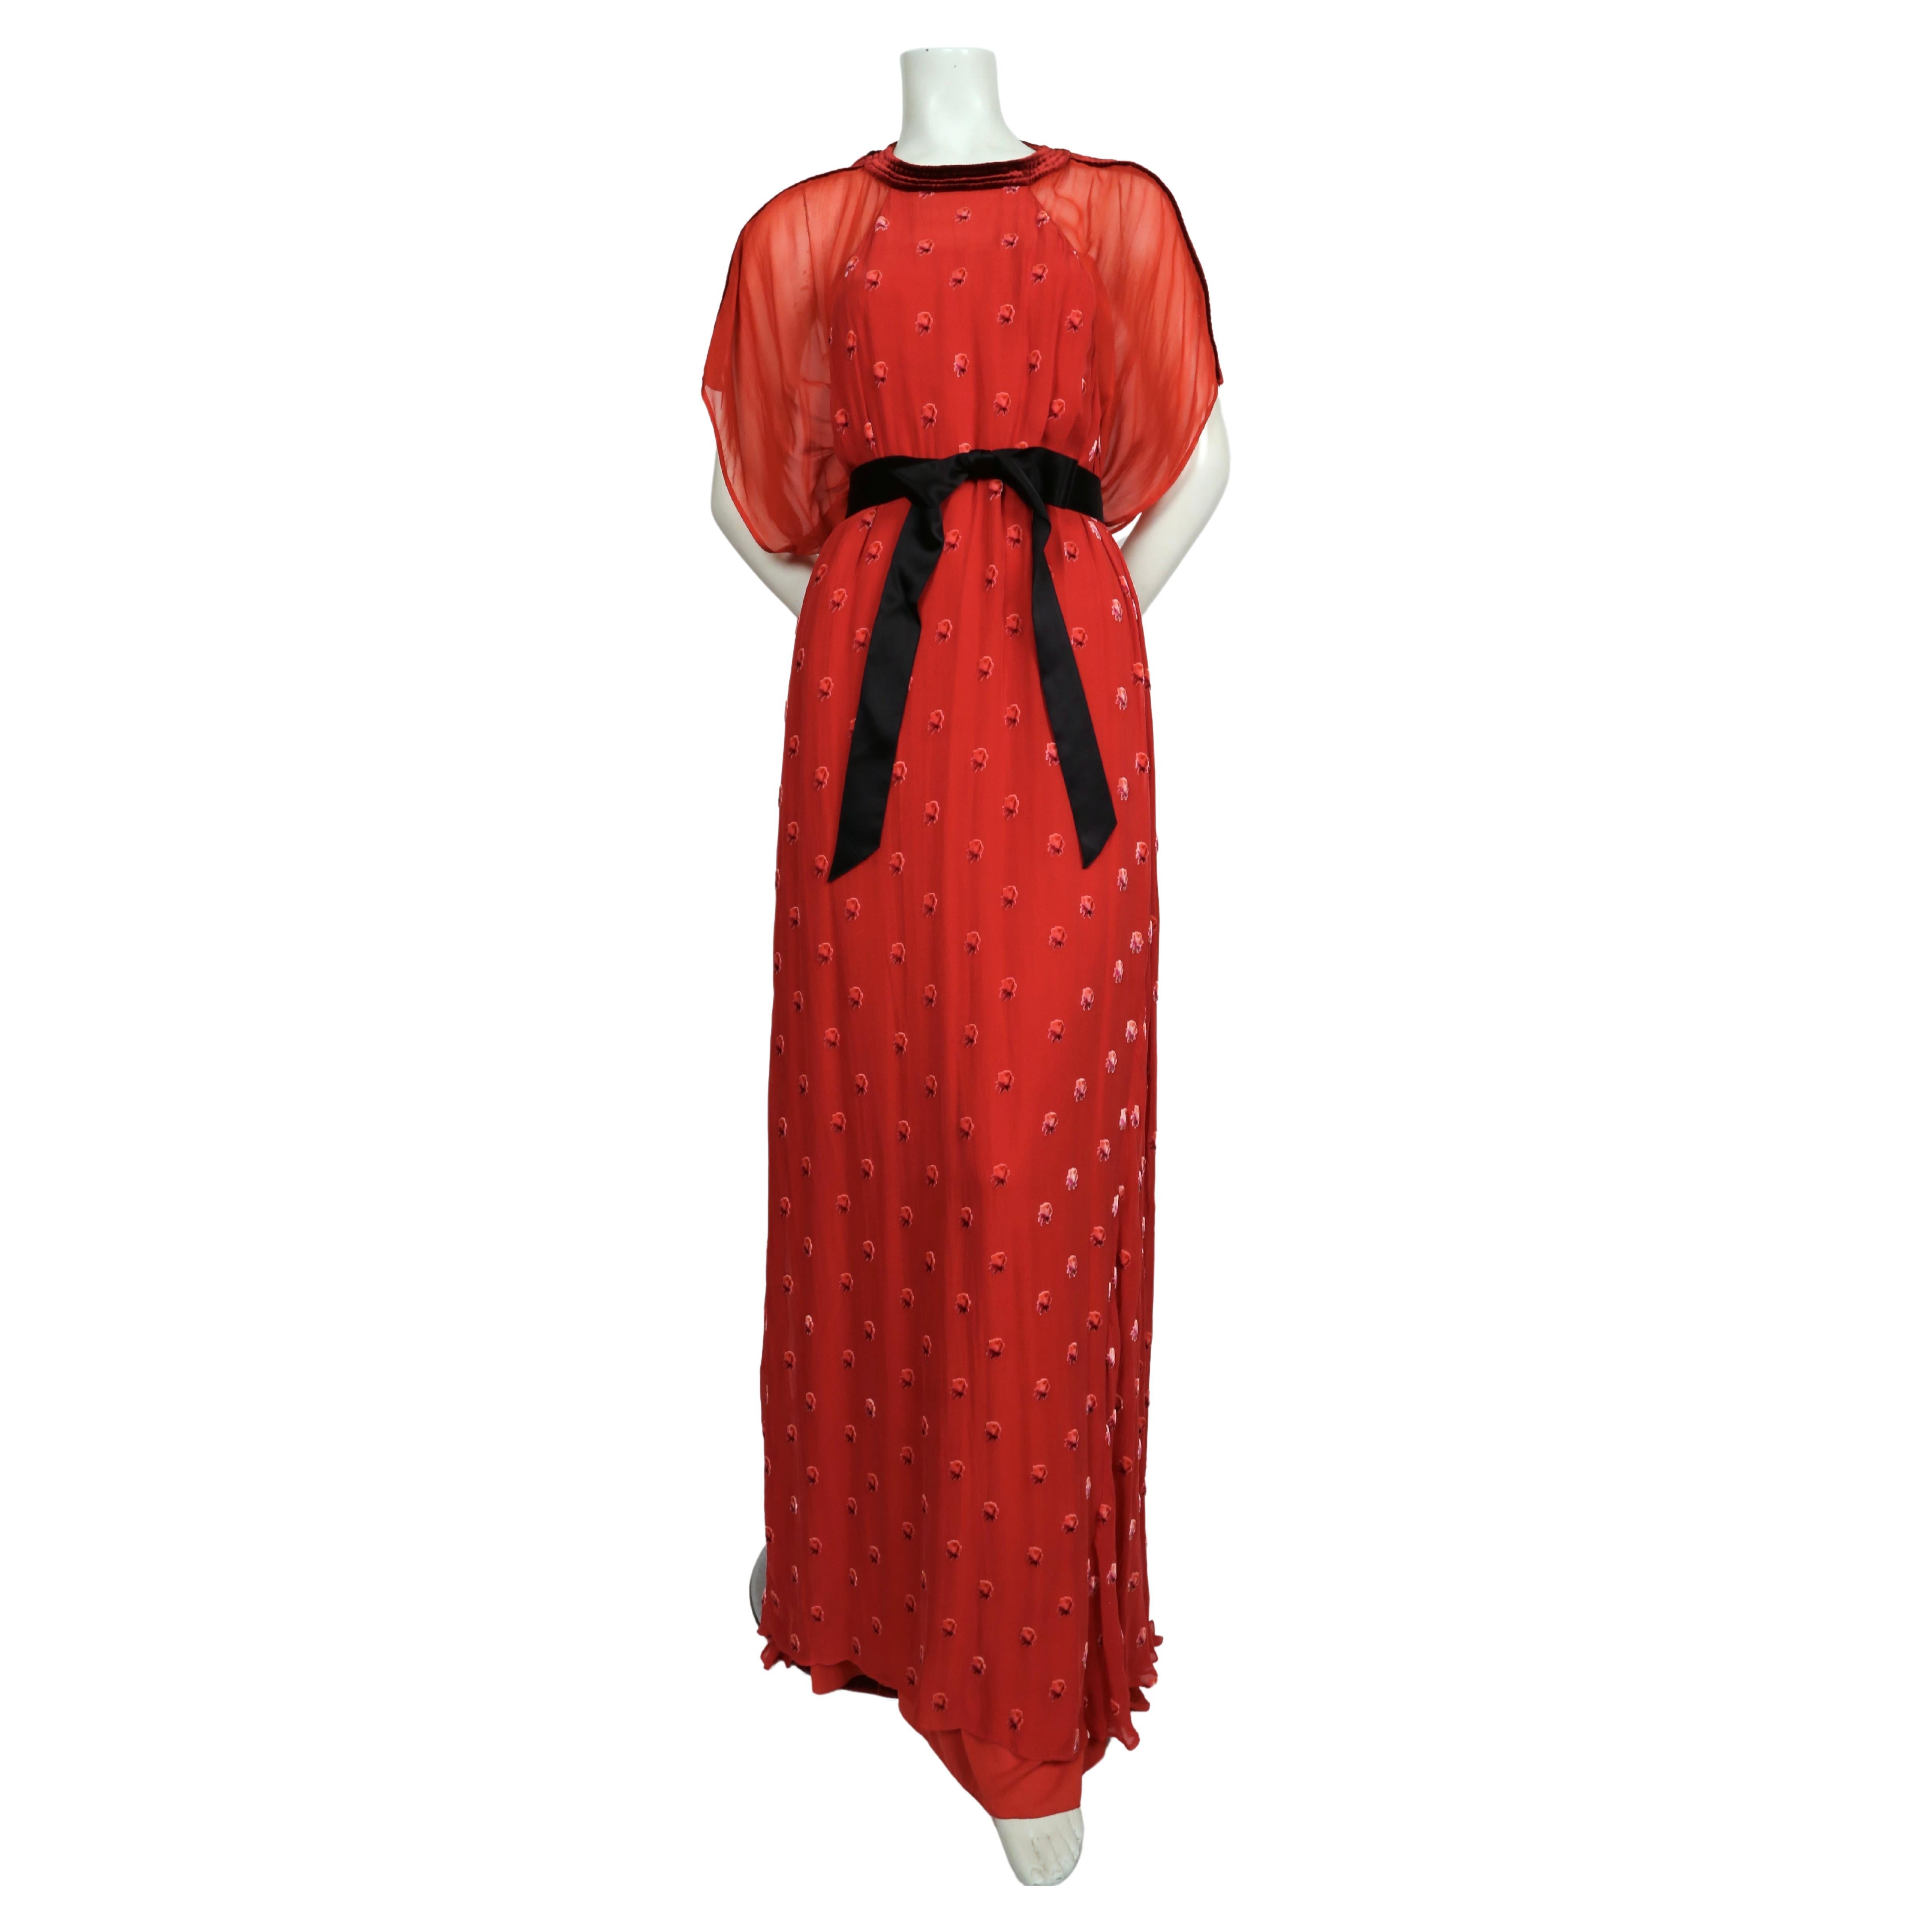 Stunning red sheer silk gown with velvet rose motif from Valentino dating to spring of 2020. Size 6. Approximate measurements for slip (outer floral layer is full): bust 34